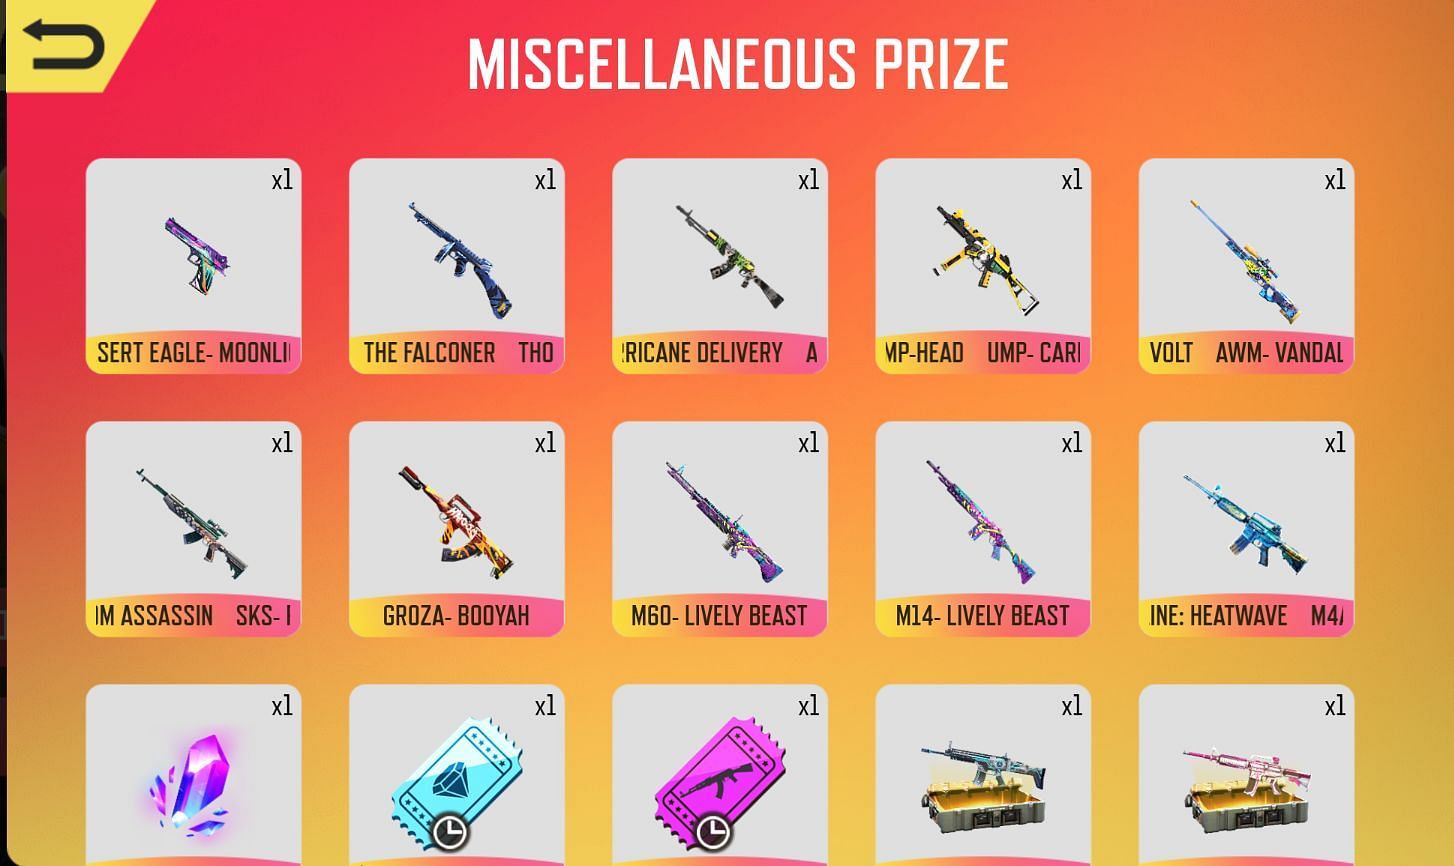 Numerous gun skins are available available as part of the miscellaneous prize (Image via Garena)